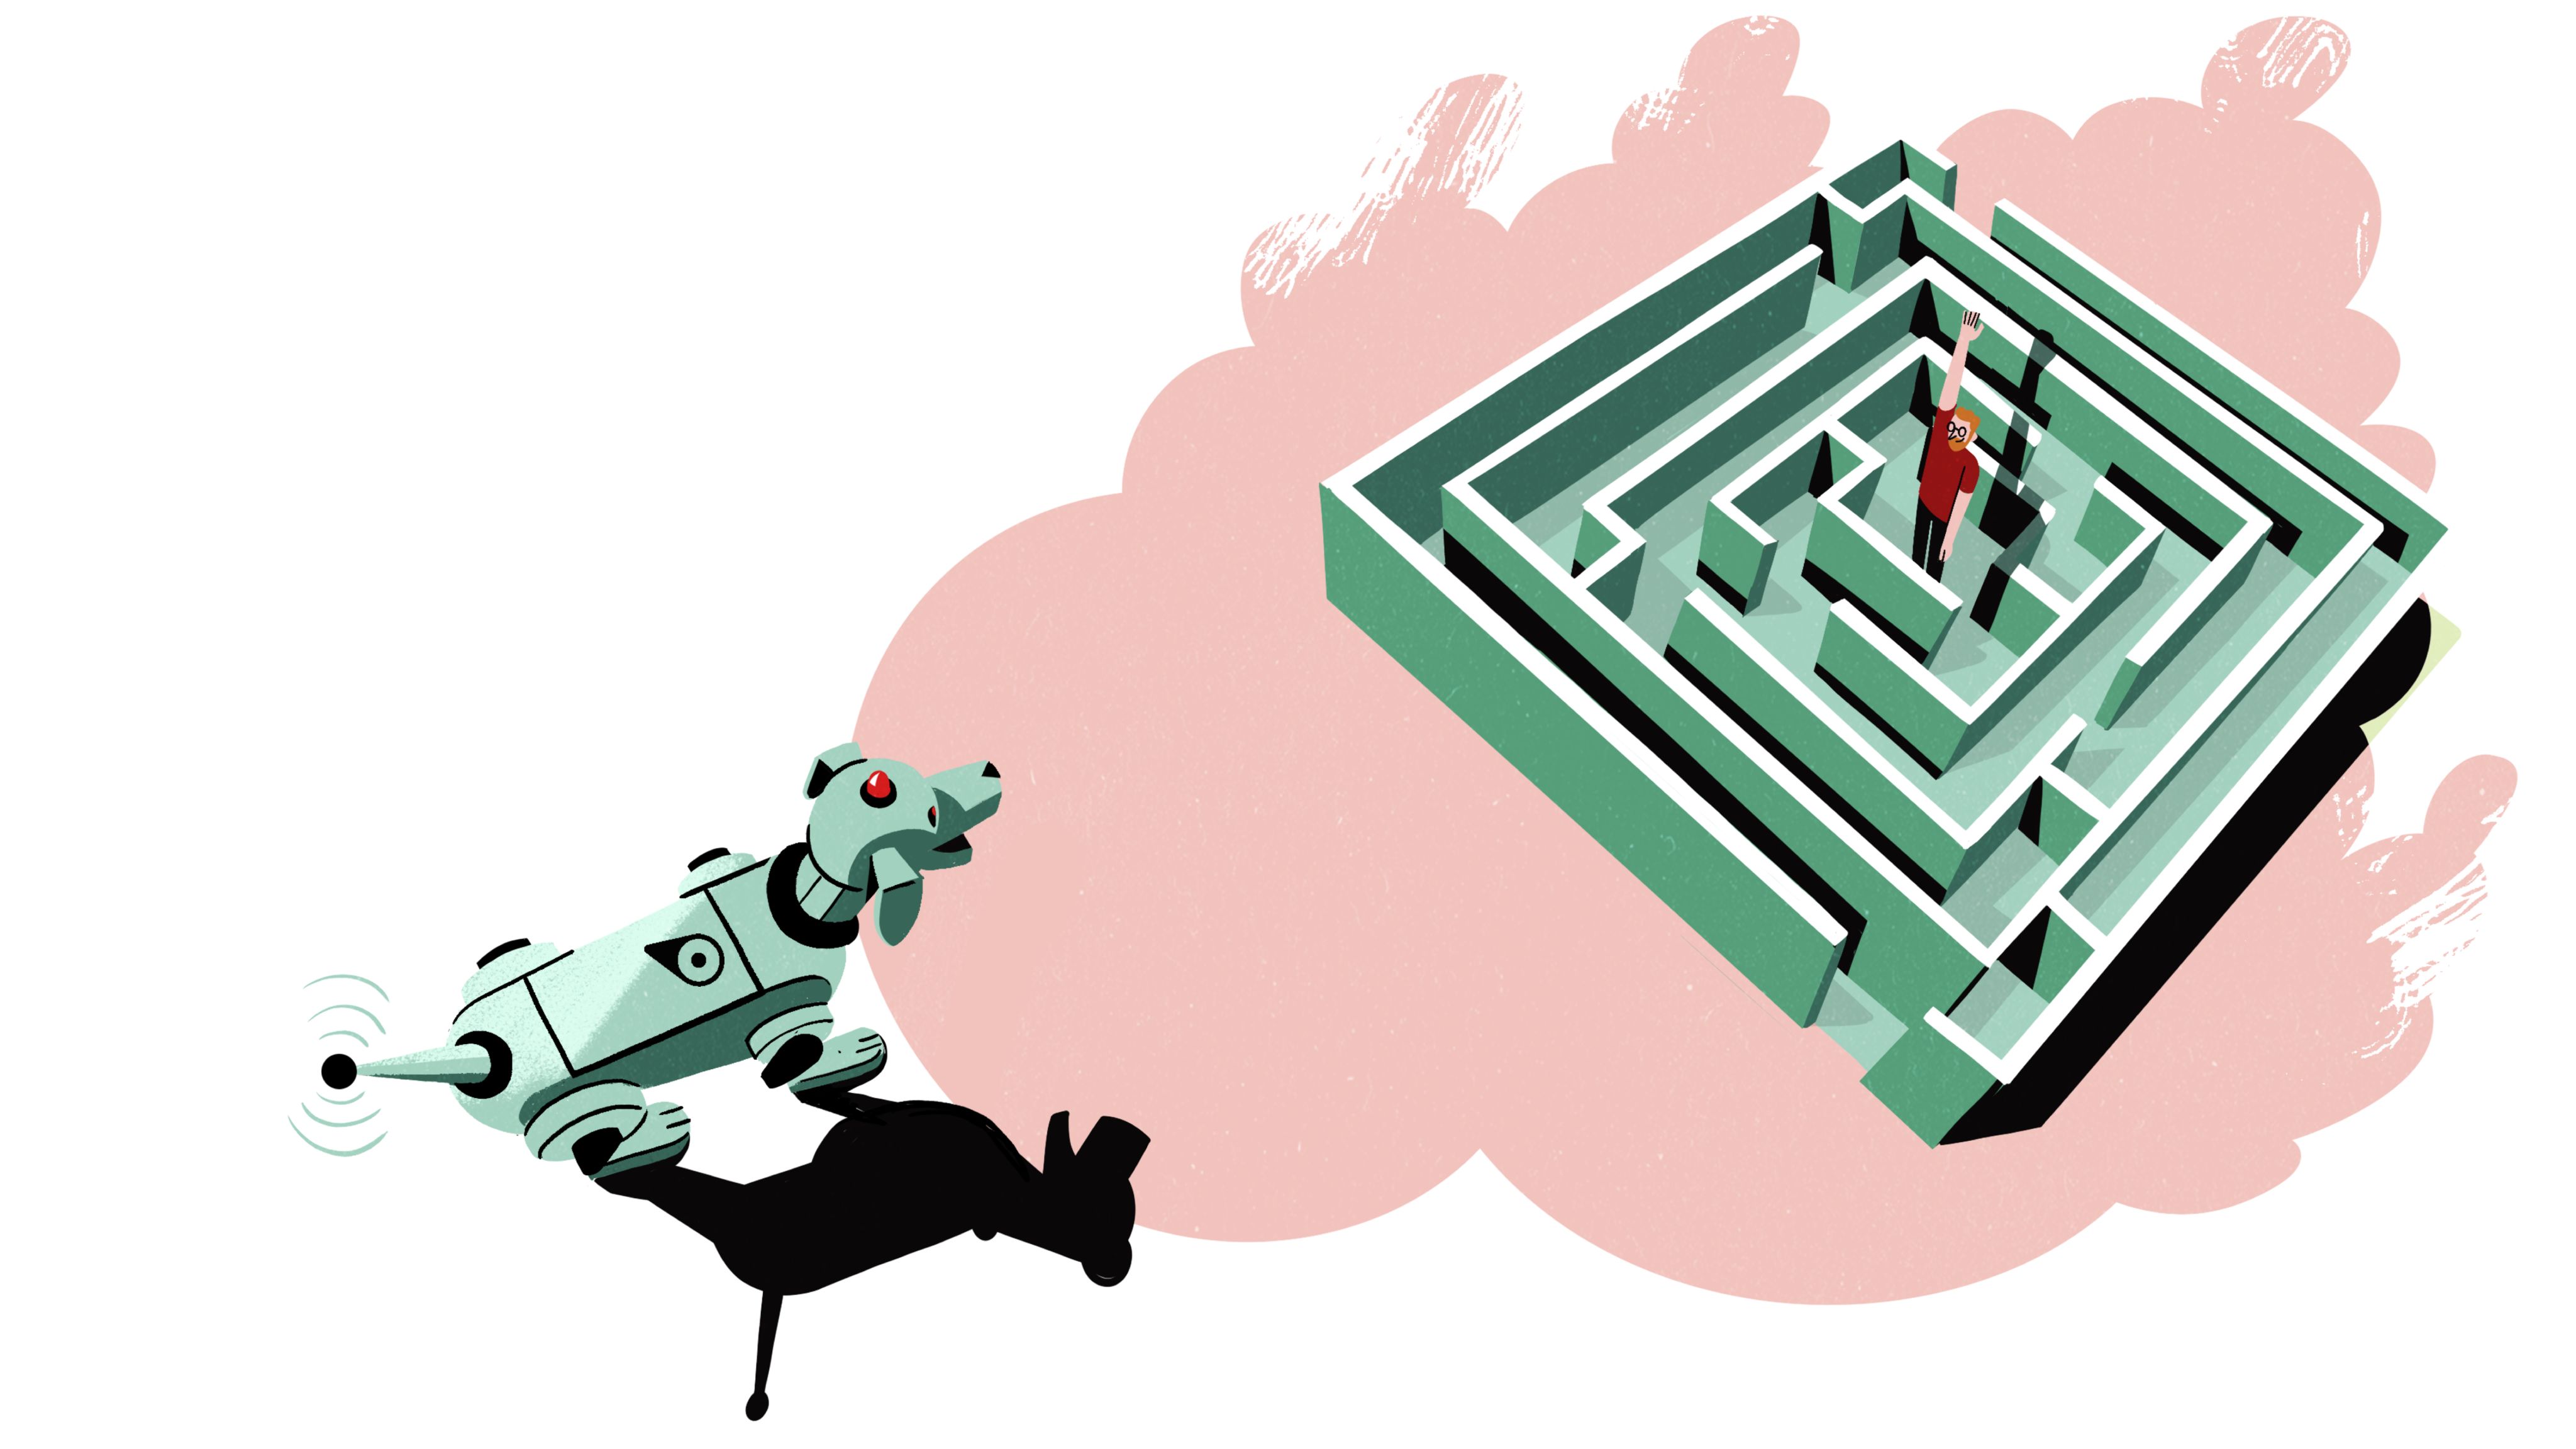 A robot dog looks at a cartoon man trapped in a maze